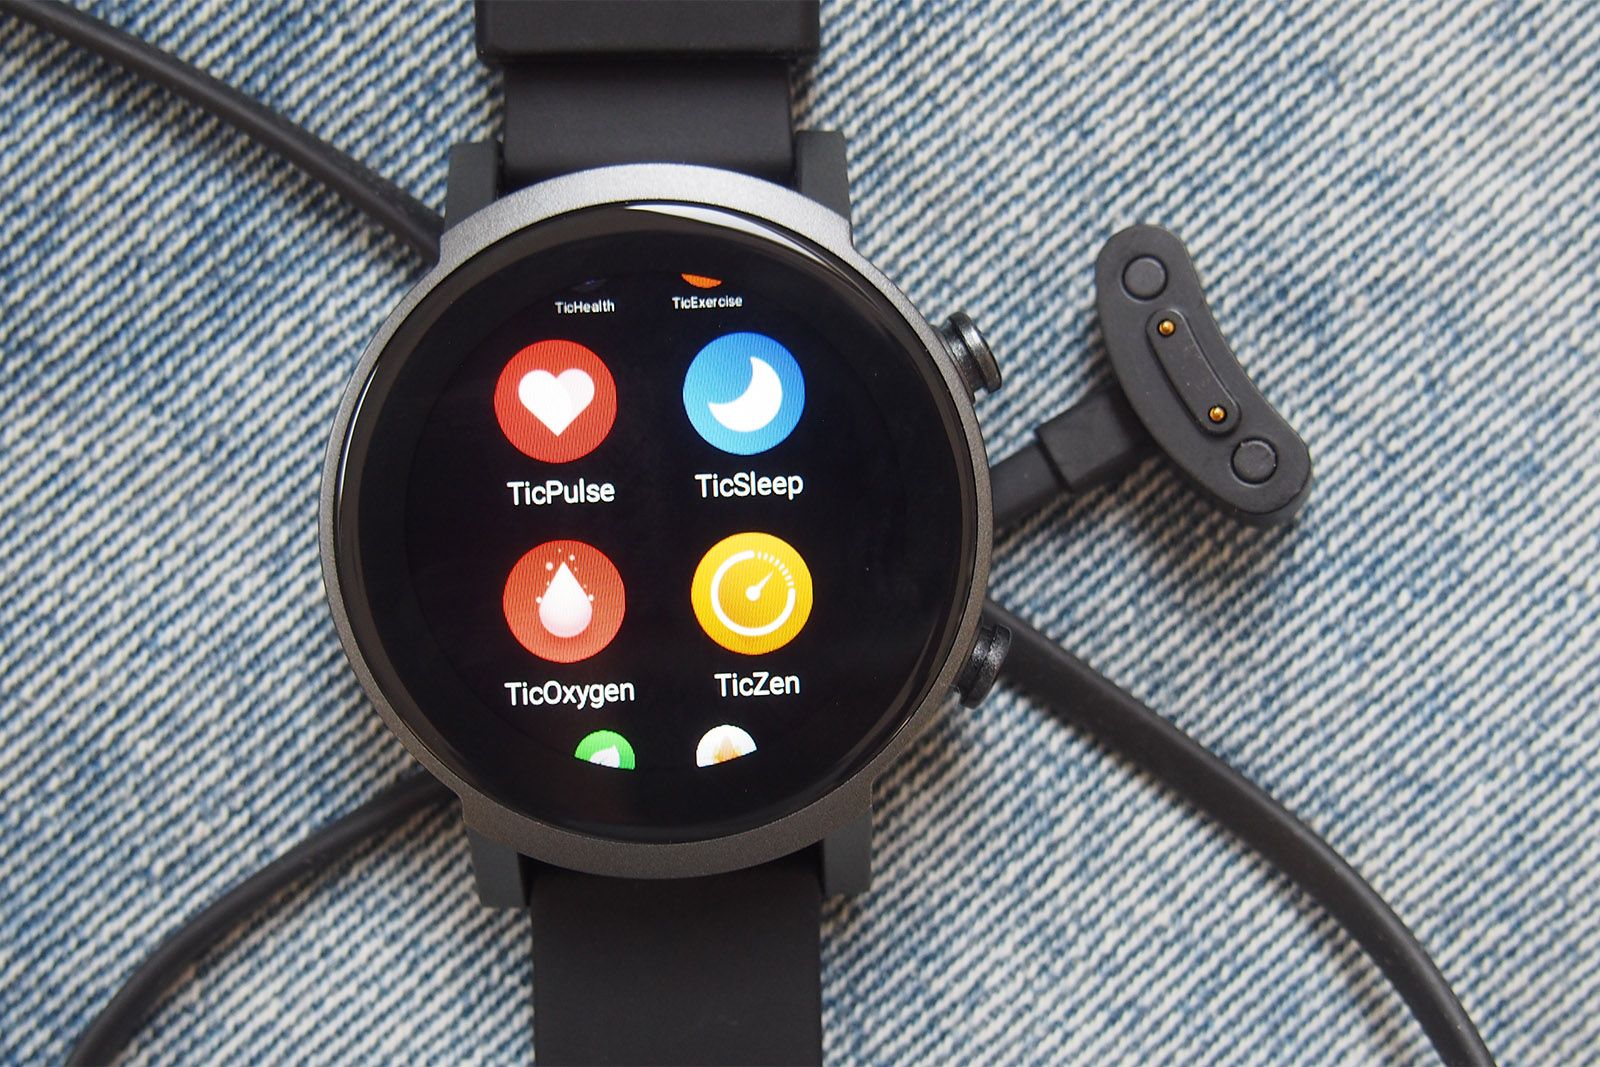 The budget TicWatch E3 shows off Wear OS at its best